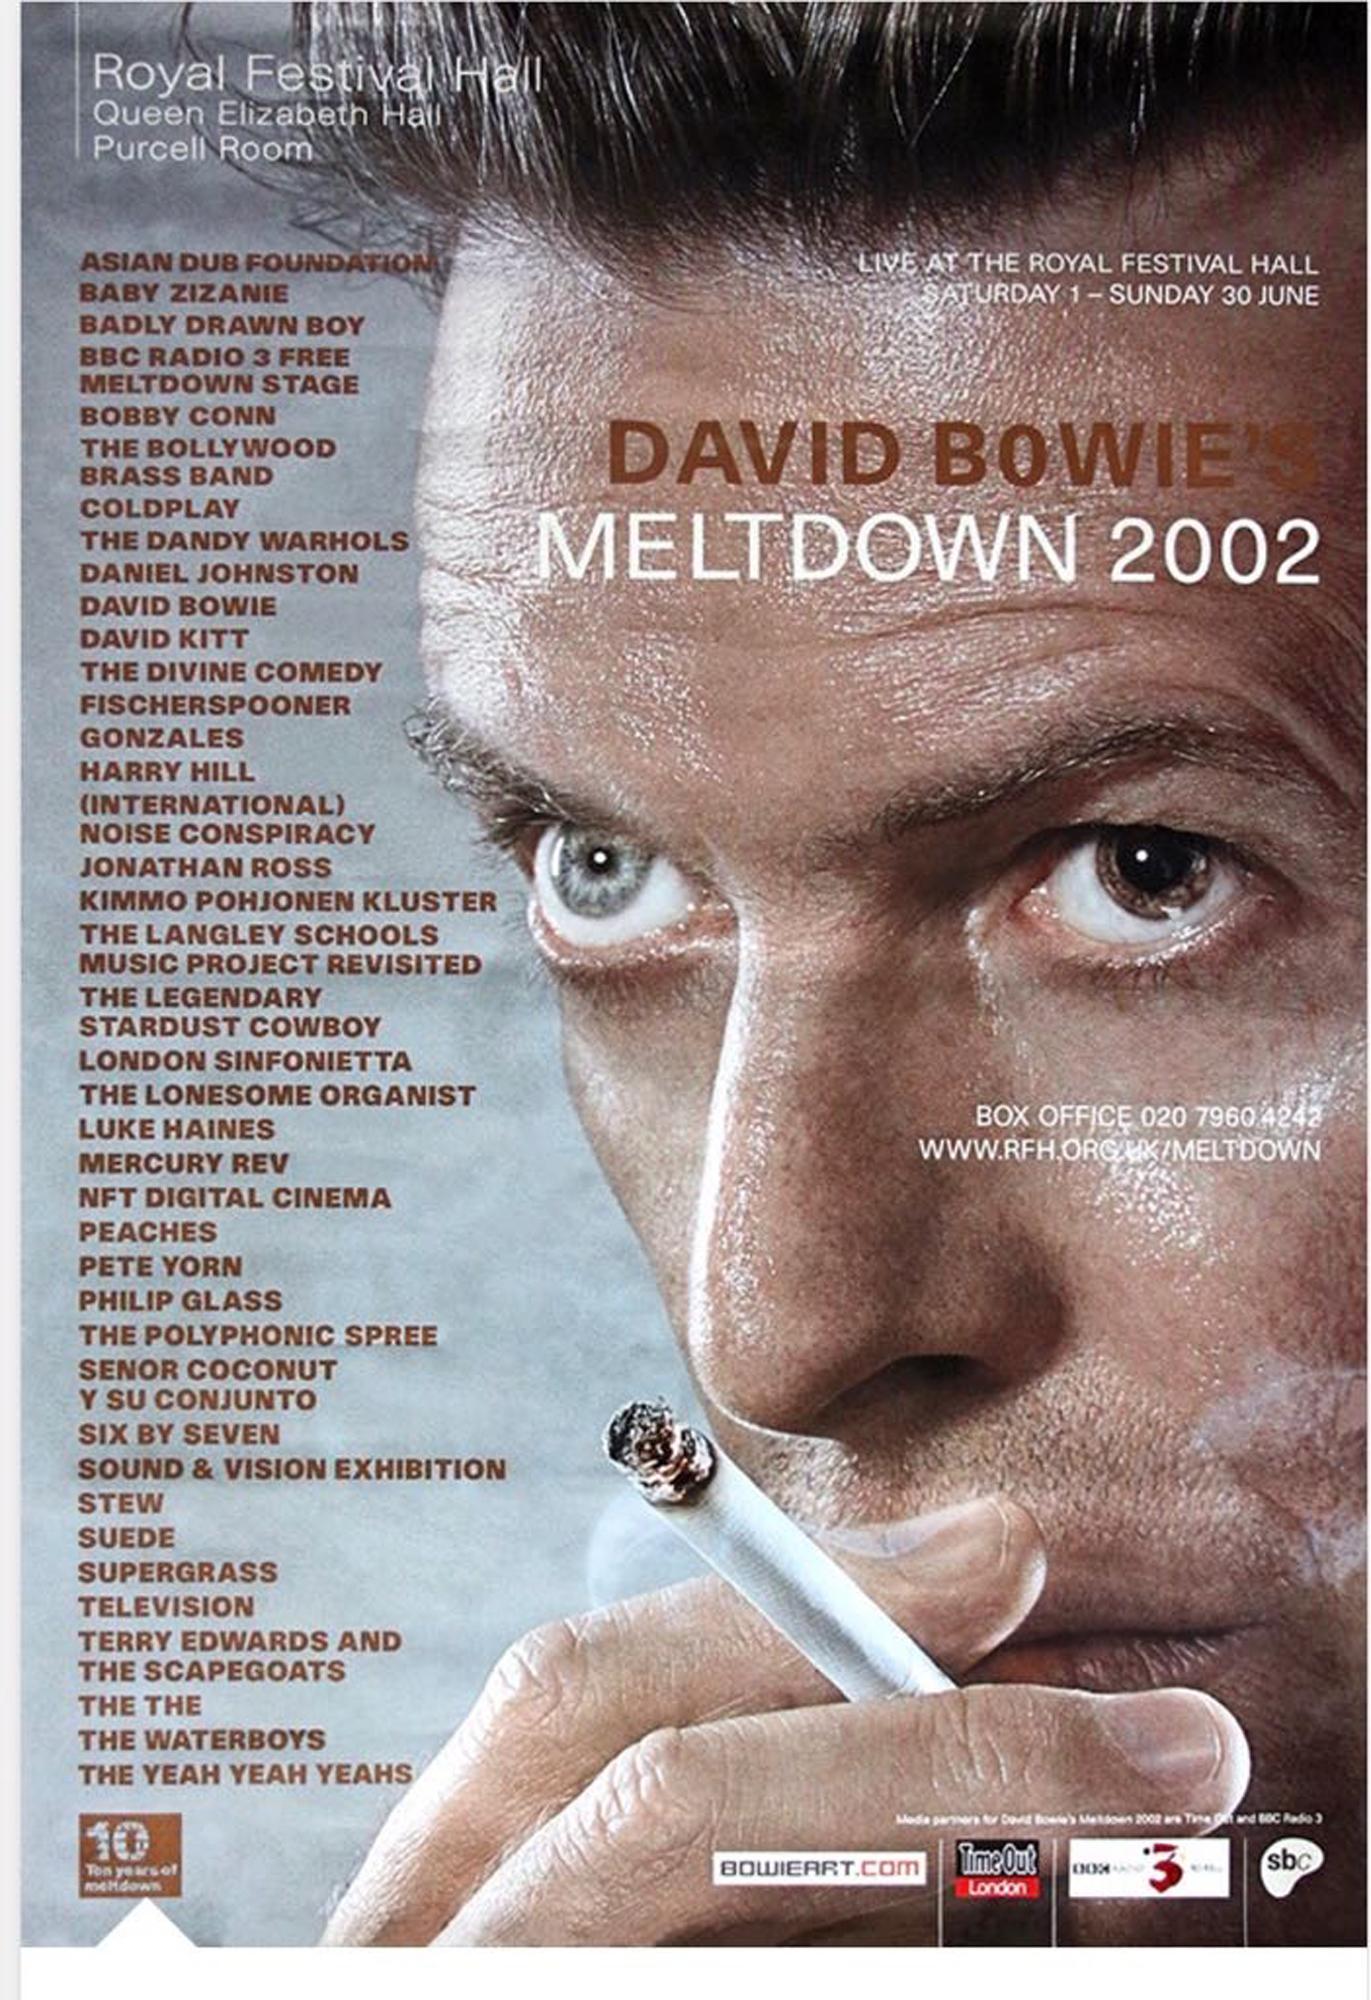 david bowie read poster